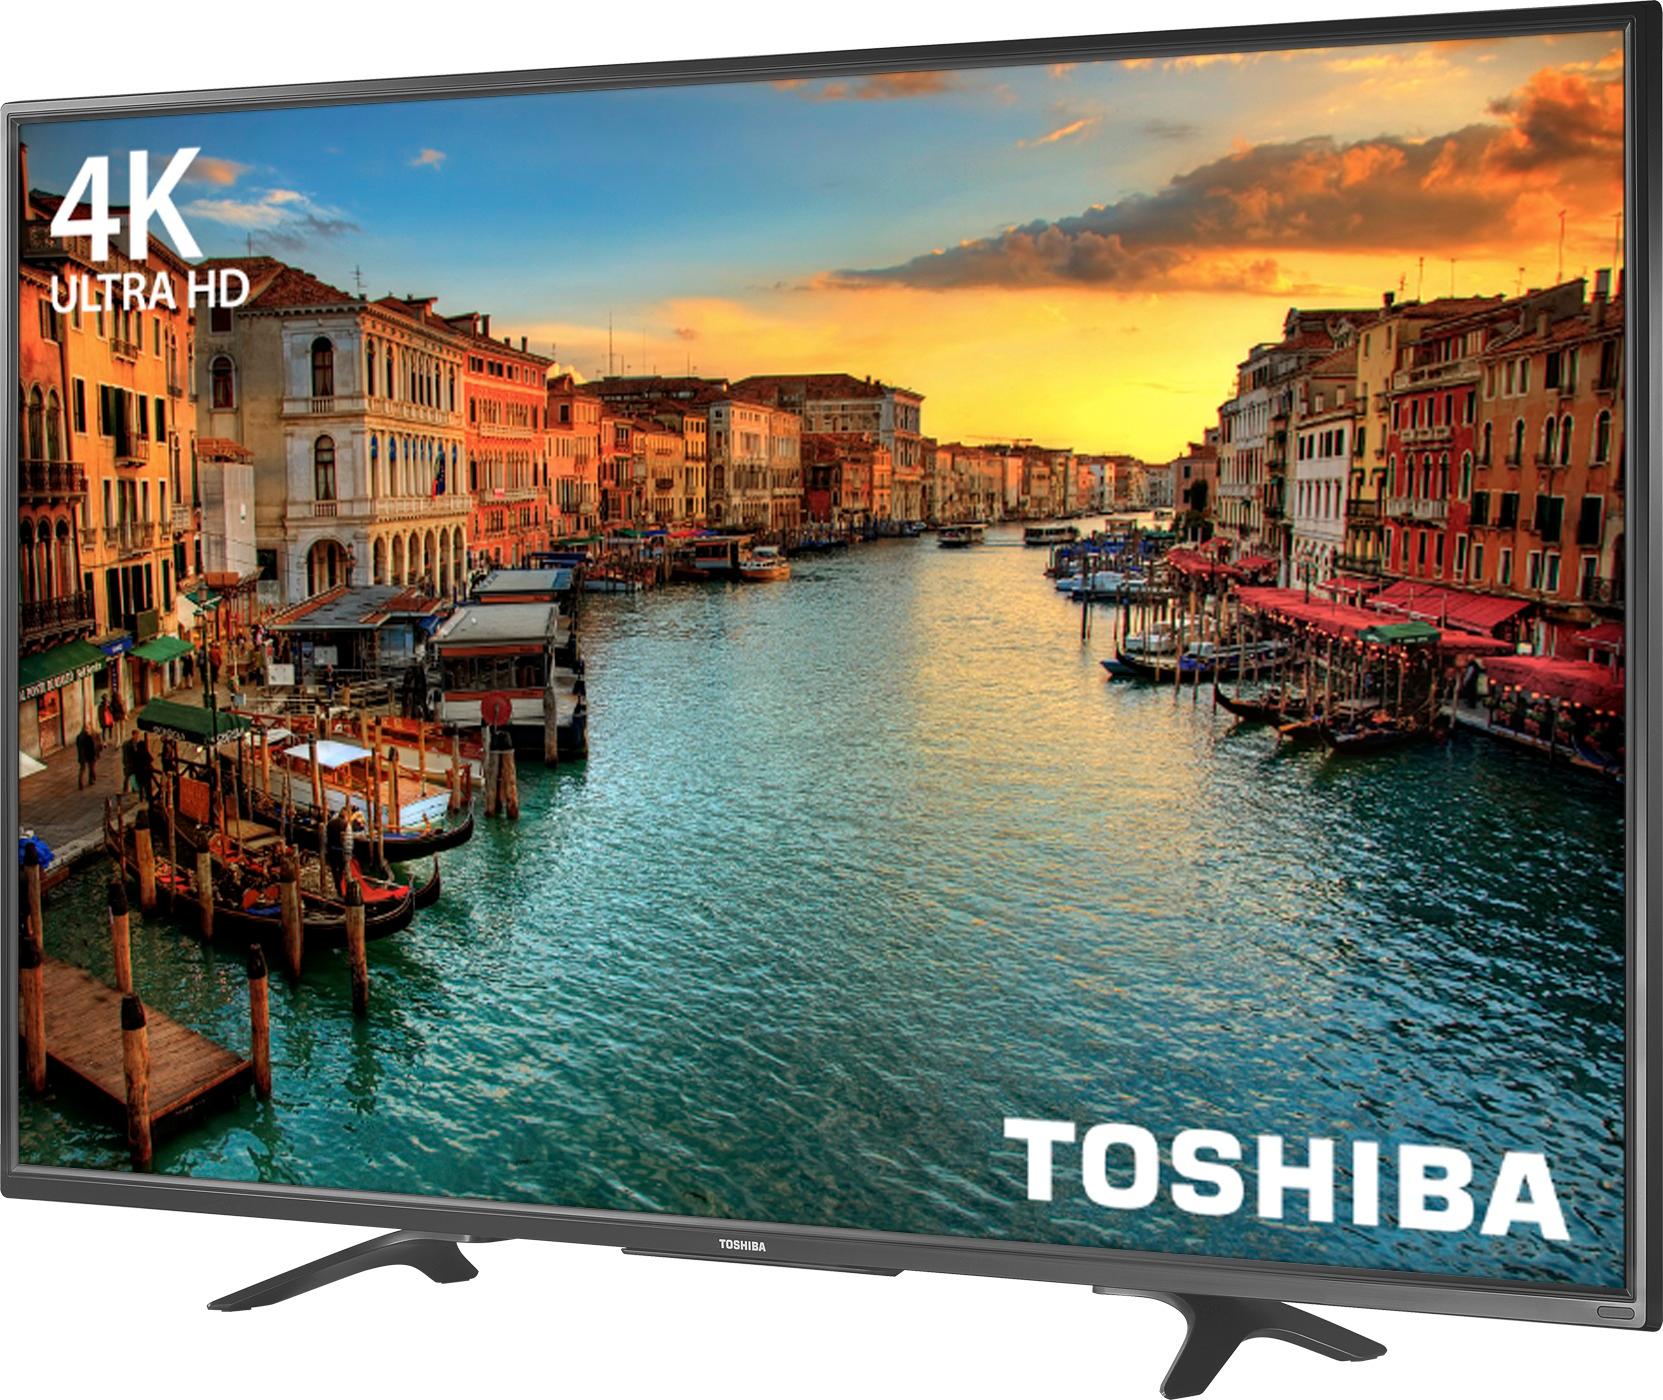 55" Class LED 2160p Built-in 4K UHD TV with HDR 55L711U18 - Best Buy